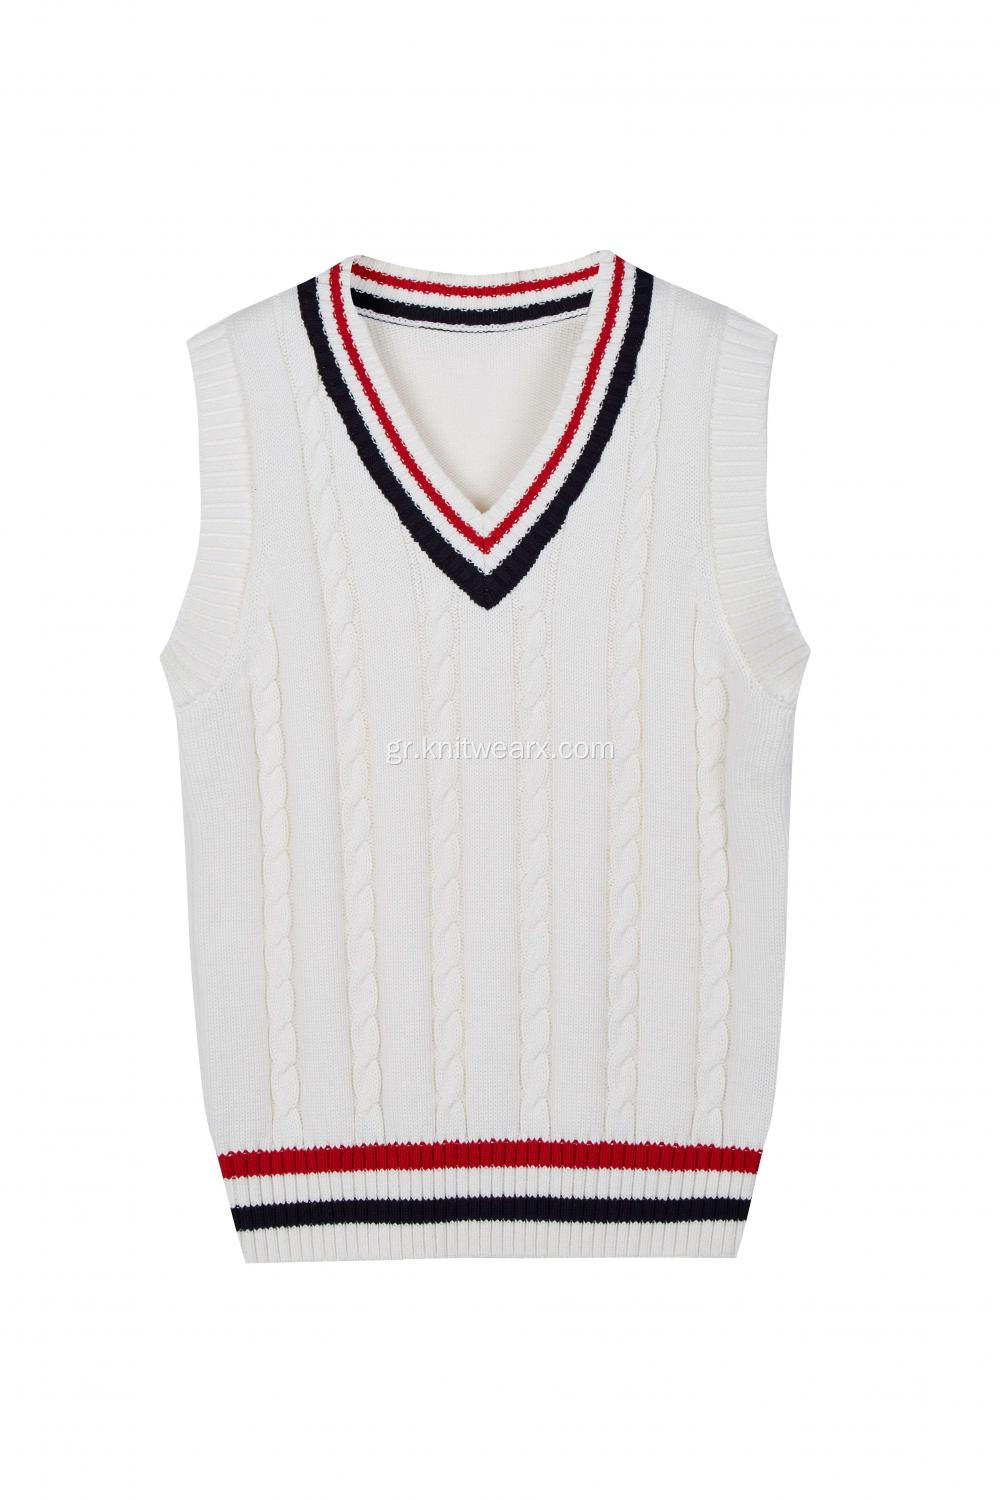 Boy's Knitted Stripe Rib Cable Cable Front School Vest